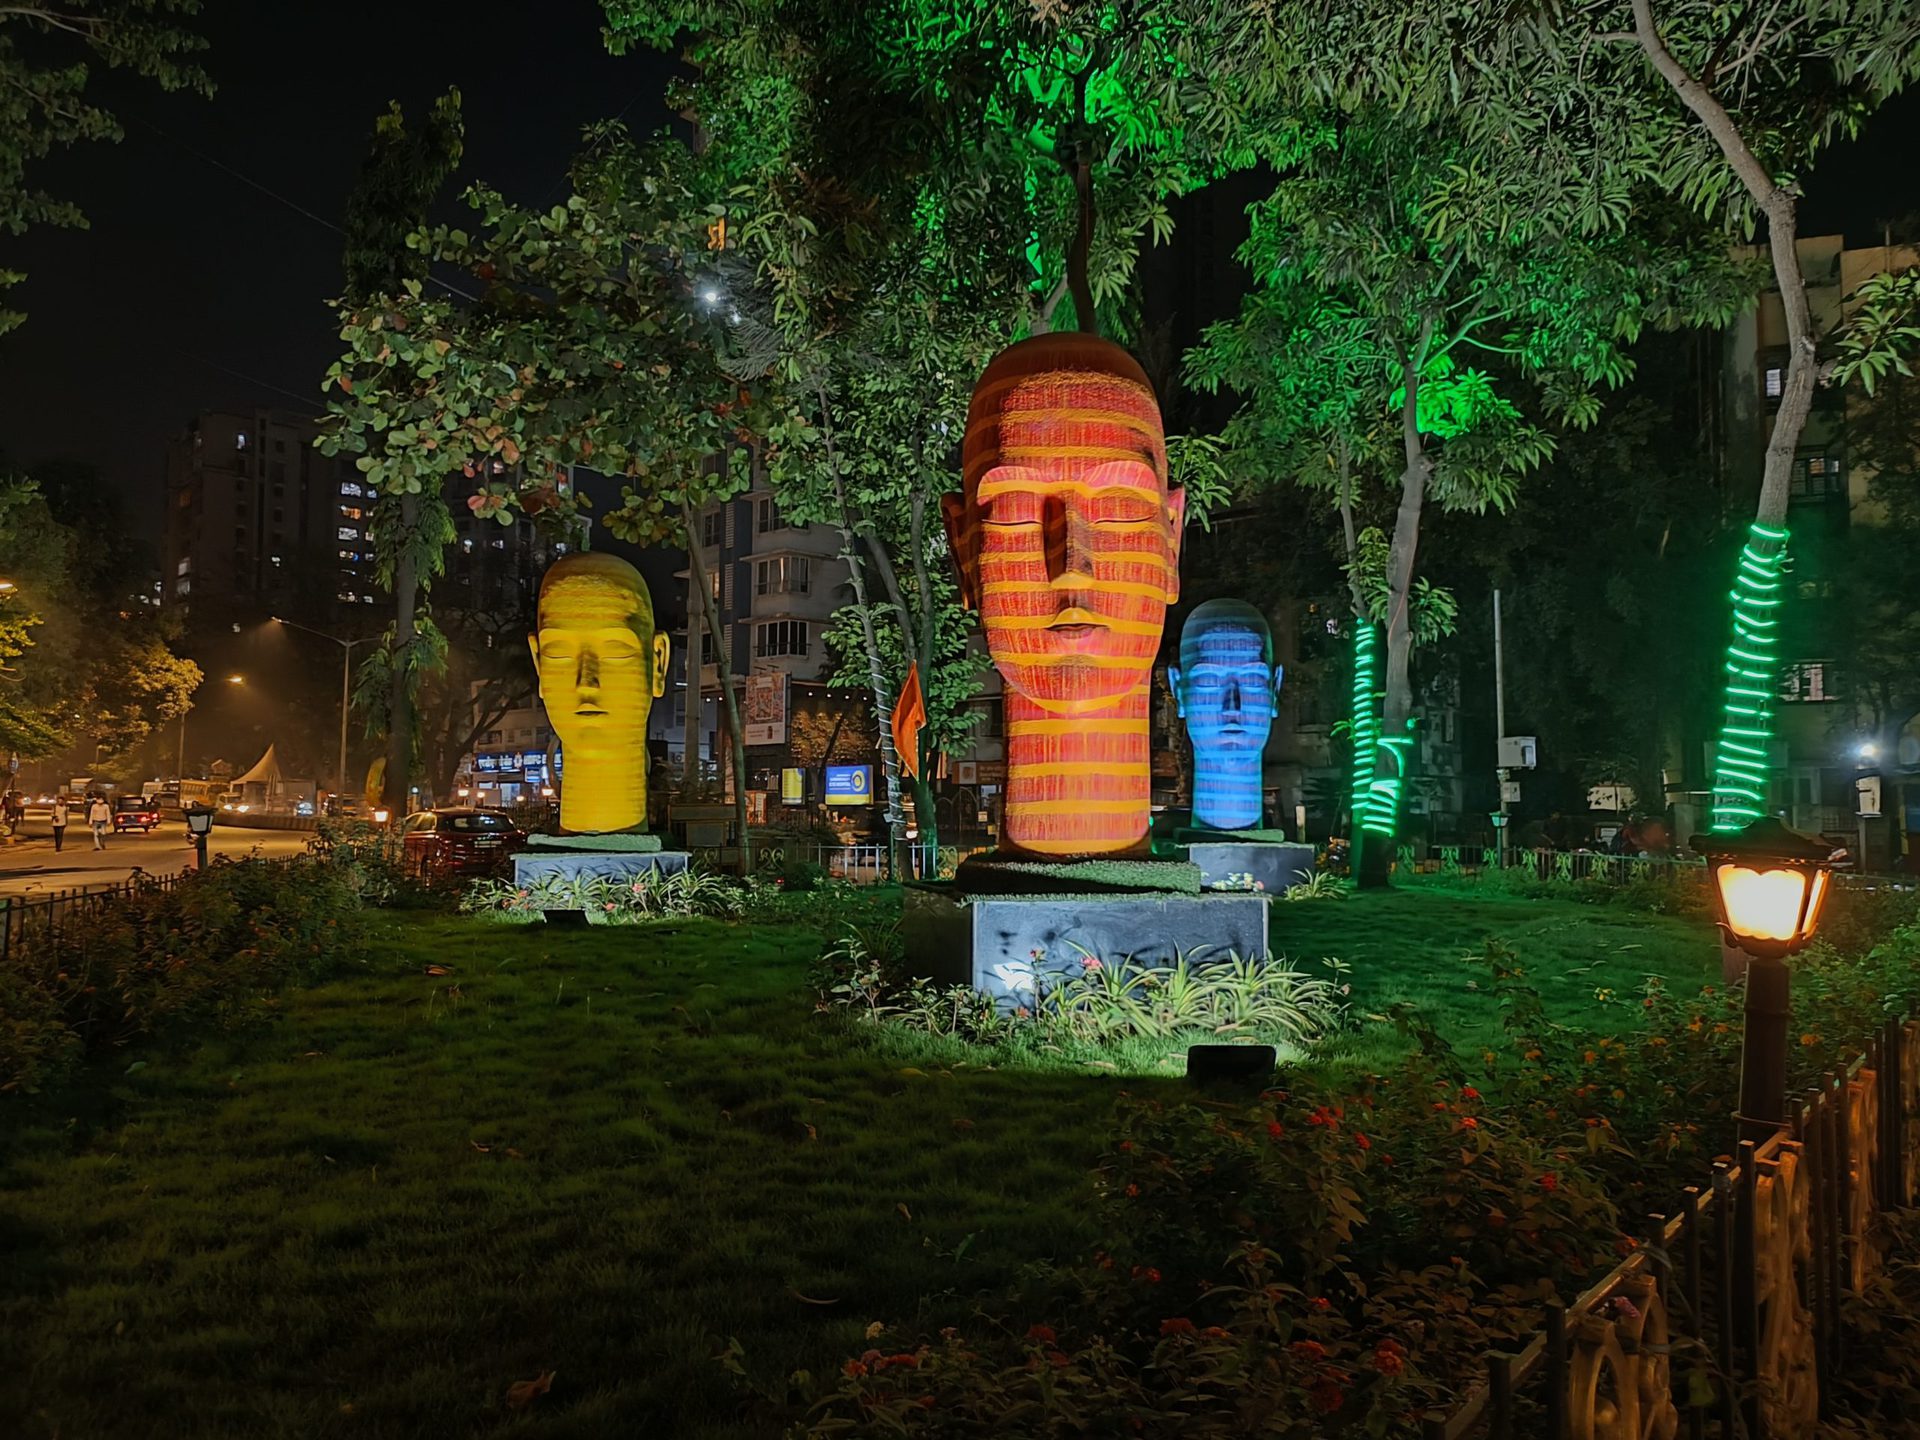 oppo reno 7 pro camera sample outdoors at night showing multicolored head sculptures in a park